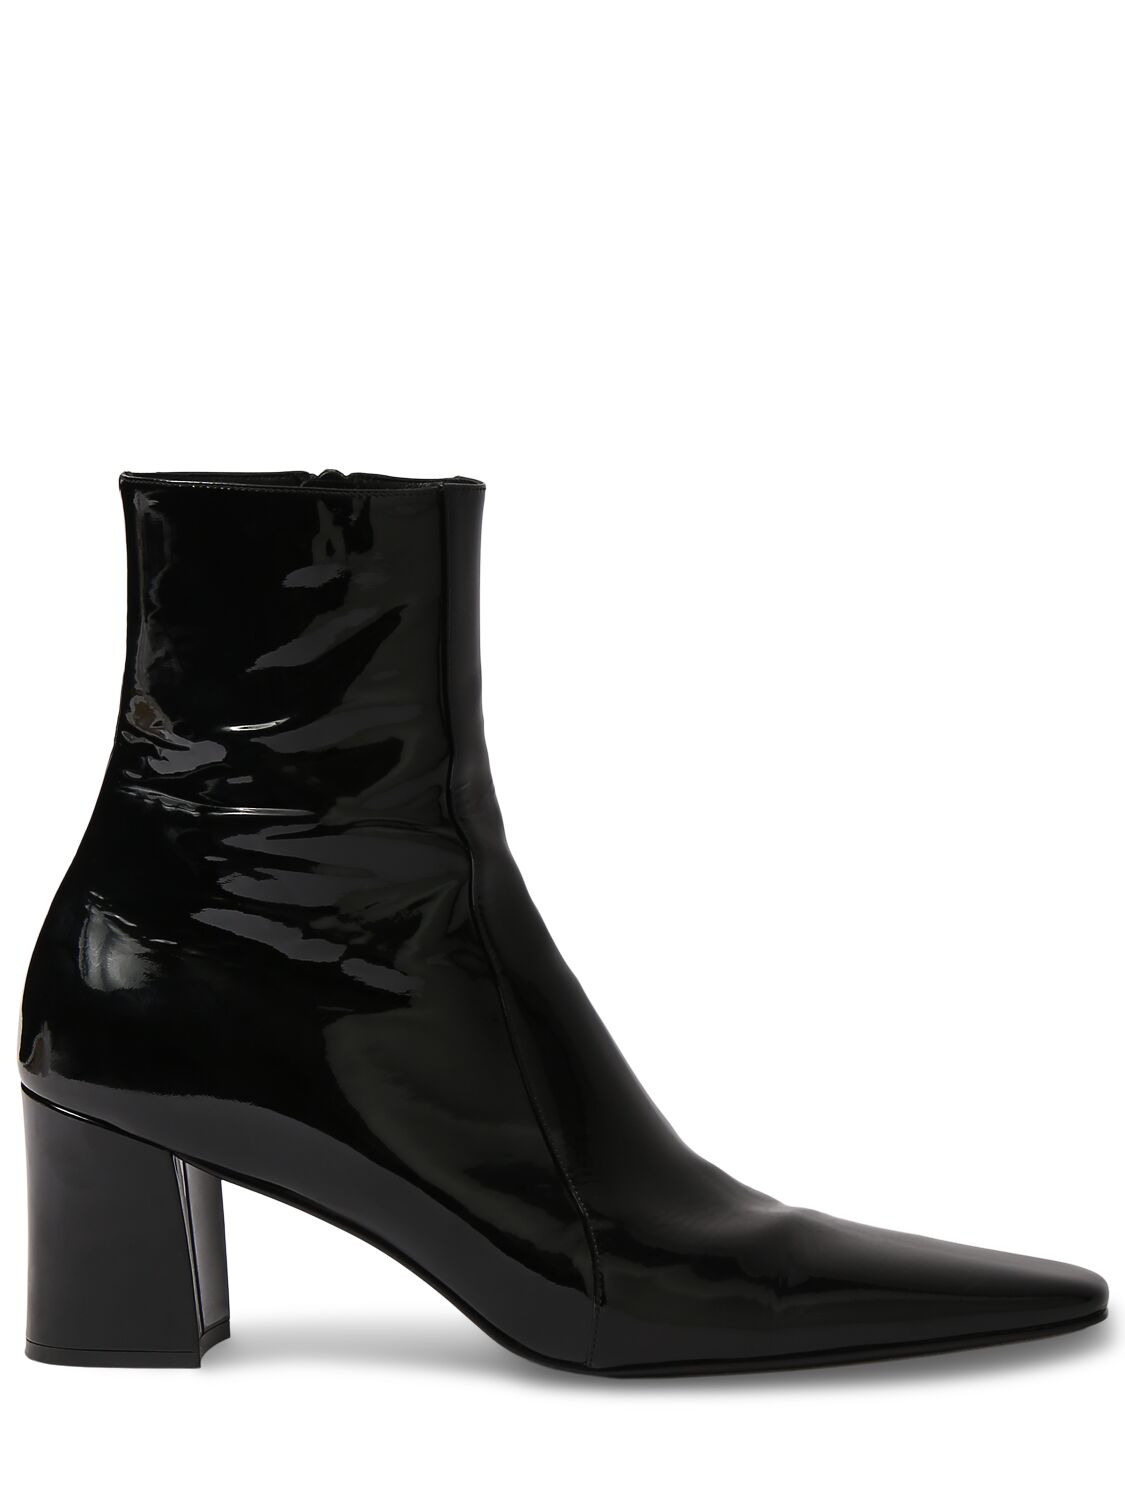 Rainer 75 Leather Zipped Boots